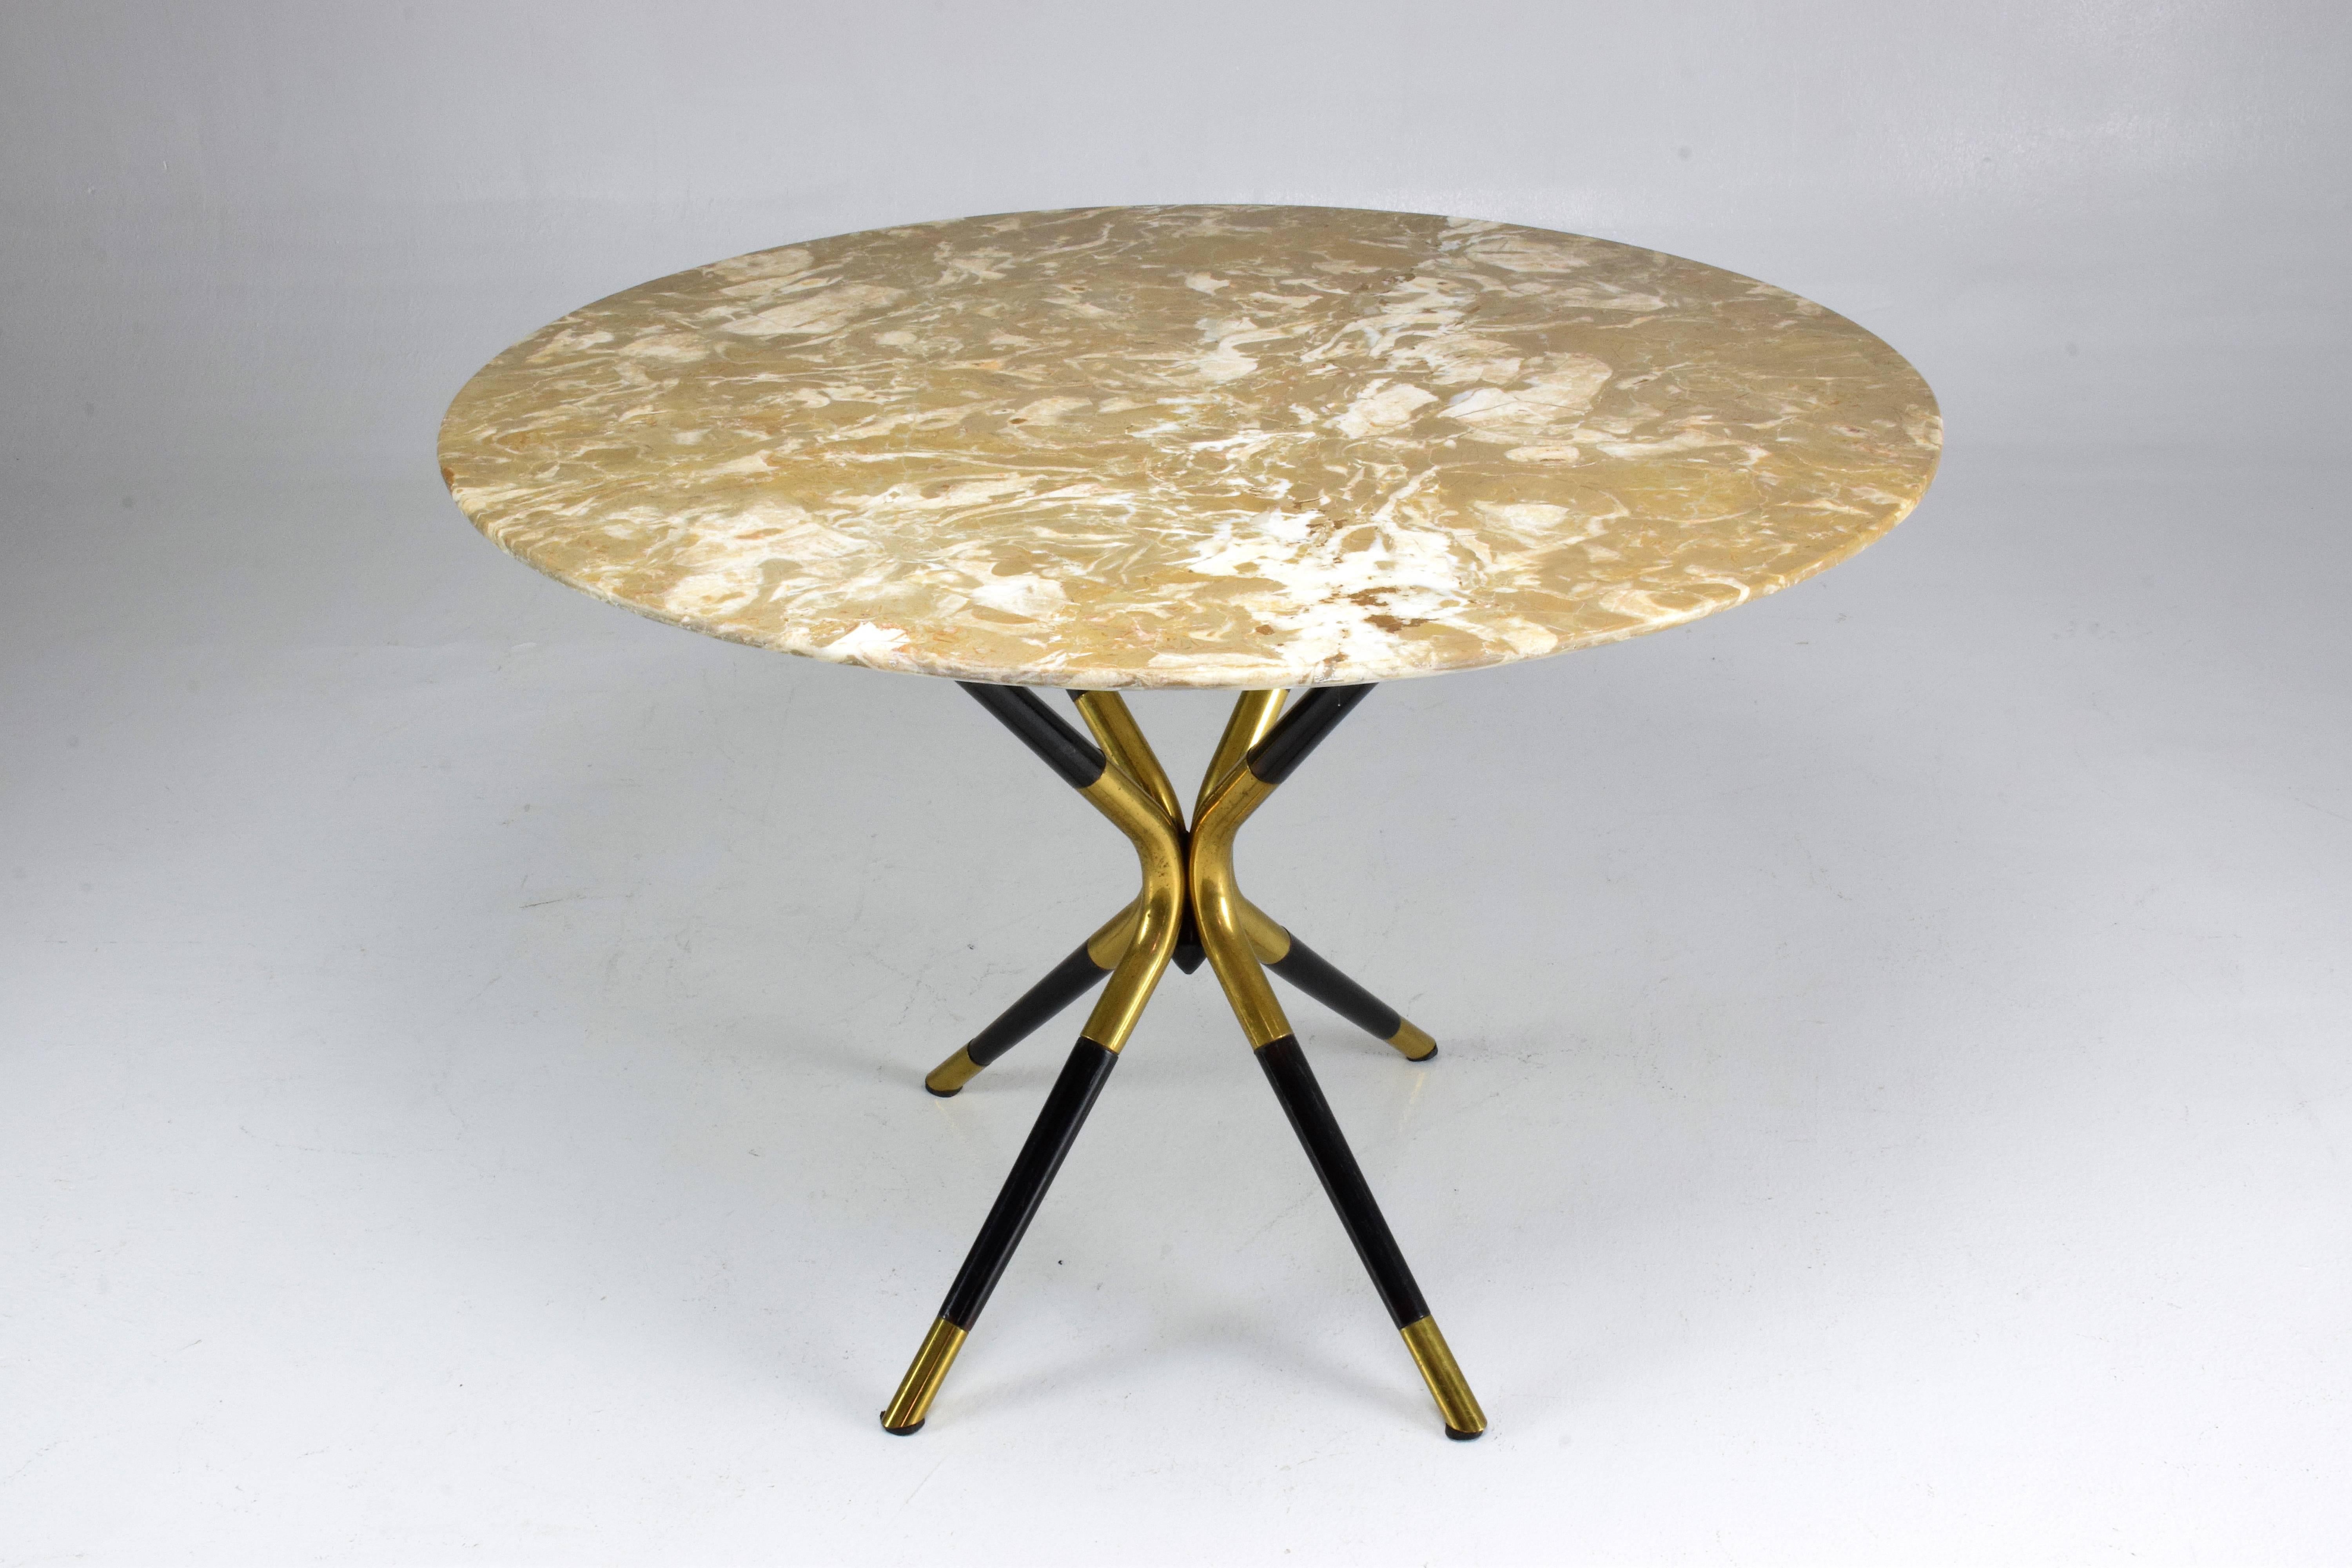 A 20th century vintage circular coffee or side table designed by Italian master Cesare Lacca circa 1950s and composed of a pink marble tabletop and his distinctive structure made of ebonized mahogany and solid brass.
 ---
Spirit Gallery is an